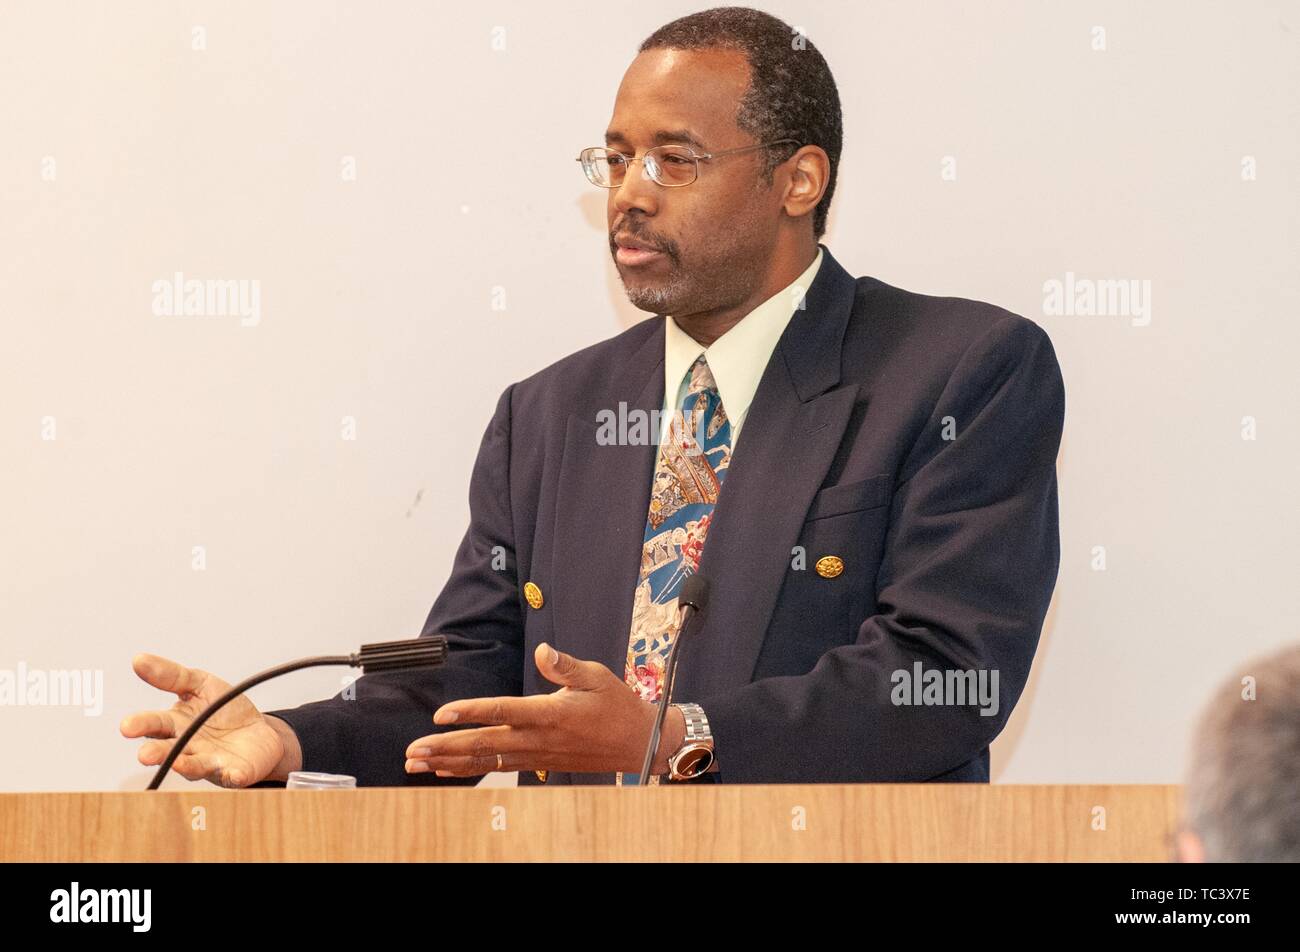 Three-quarter profile view of neurosurgeon Ben Carson speaking from a podium during the Minority Pre-Health Conference at the Johns Hopkins University, Baltimore, Maryland, March, 2008. From the Homewood Photography Collection. () Stock Photo